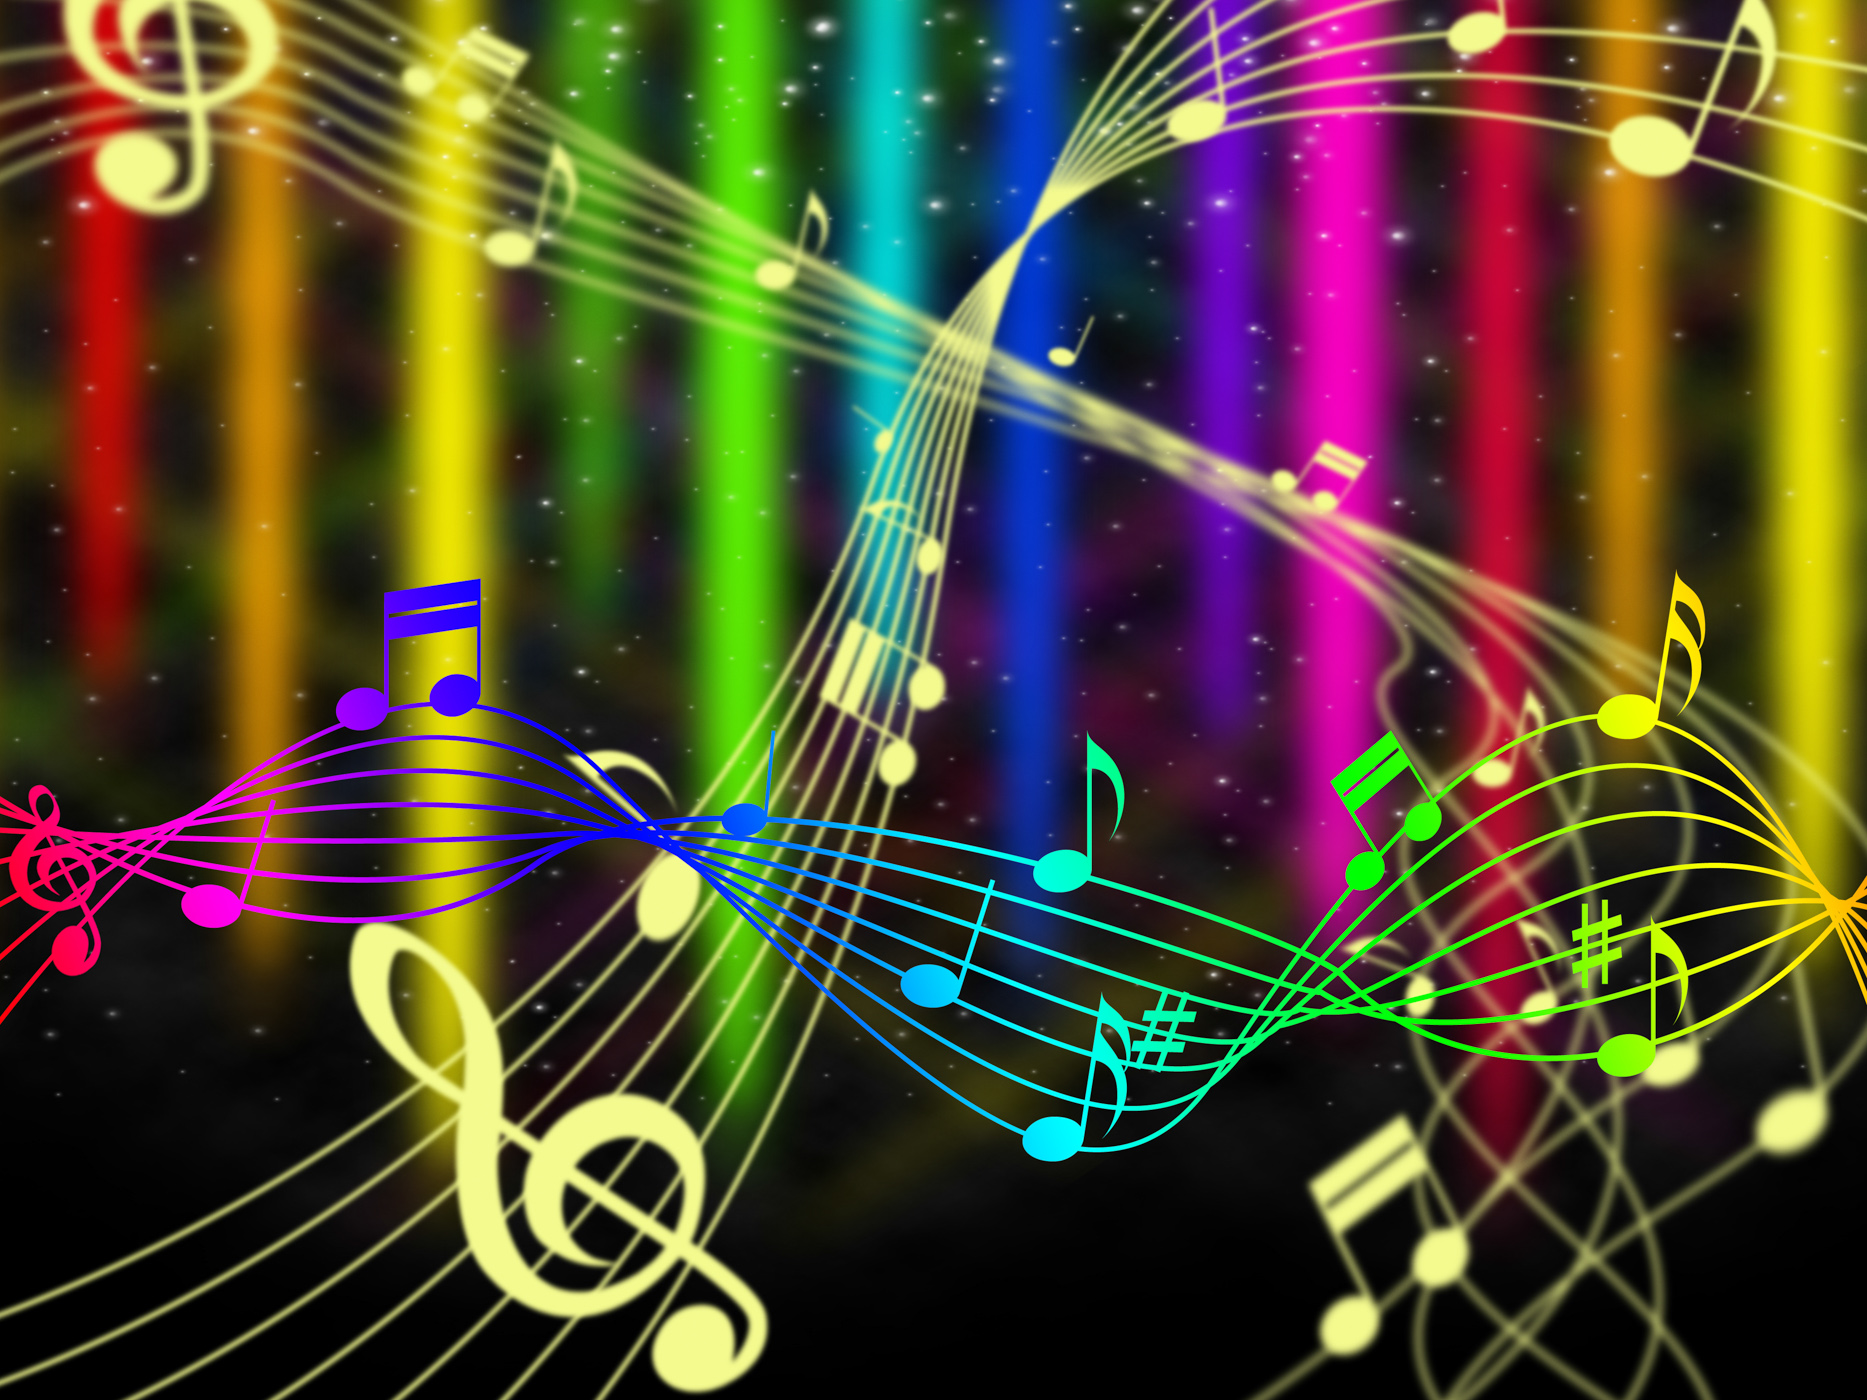 Background color shows music note and acoustic photo